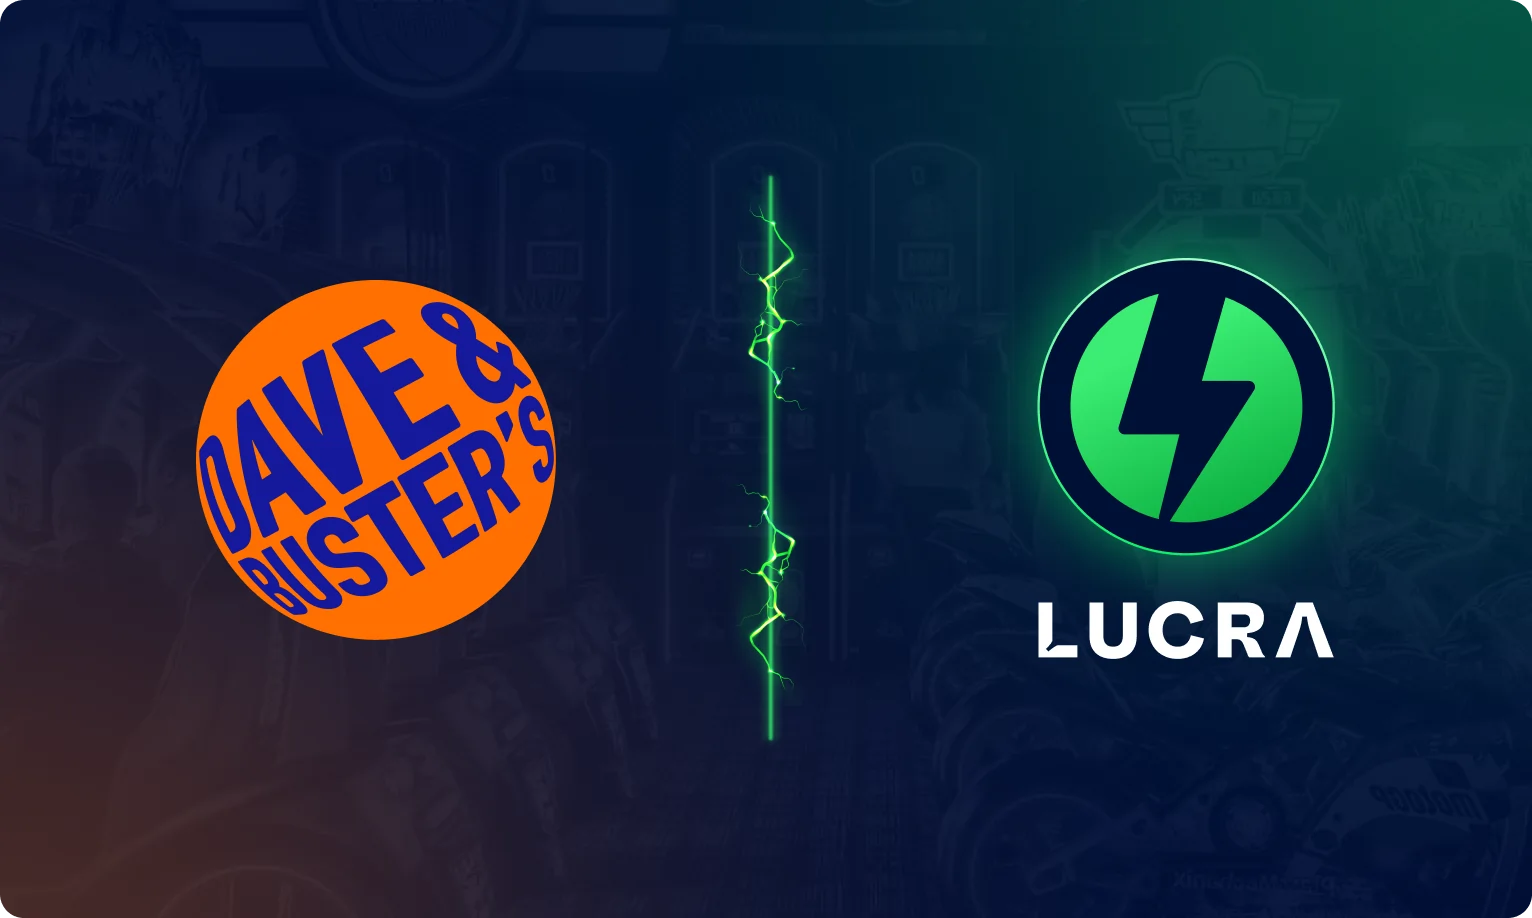 Dave & Busters and LUCRA logo